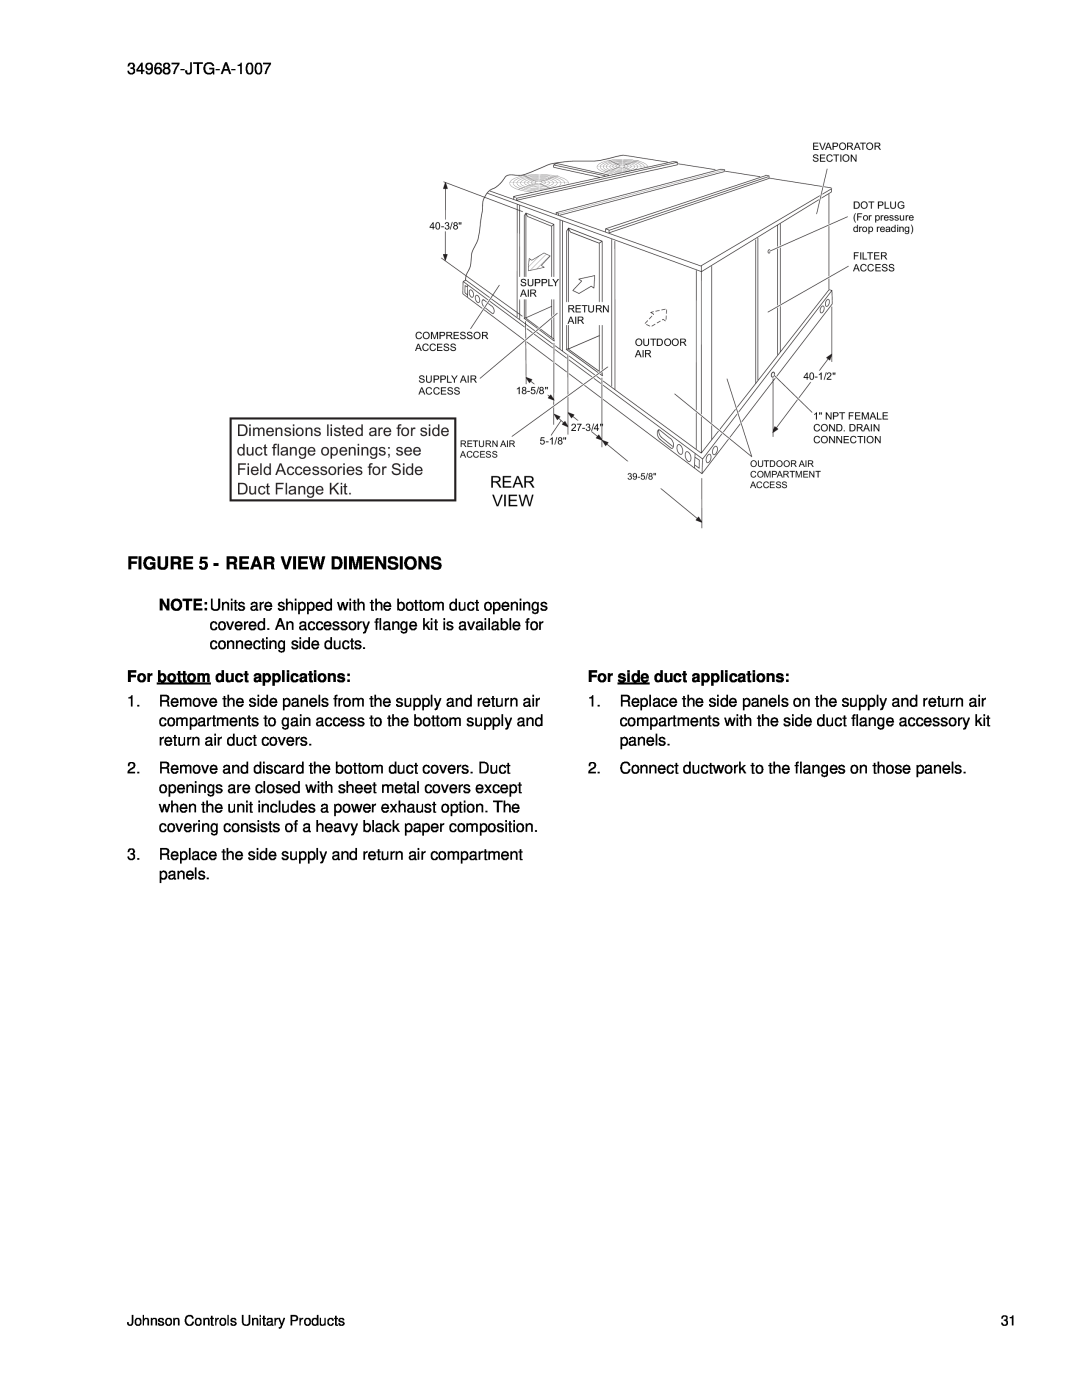 Johnson Controls J15 Rear View Dimensions, Dimensions listed are for side, duct flange openings see, Duct Flange Kit 